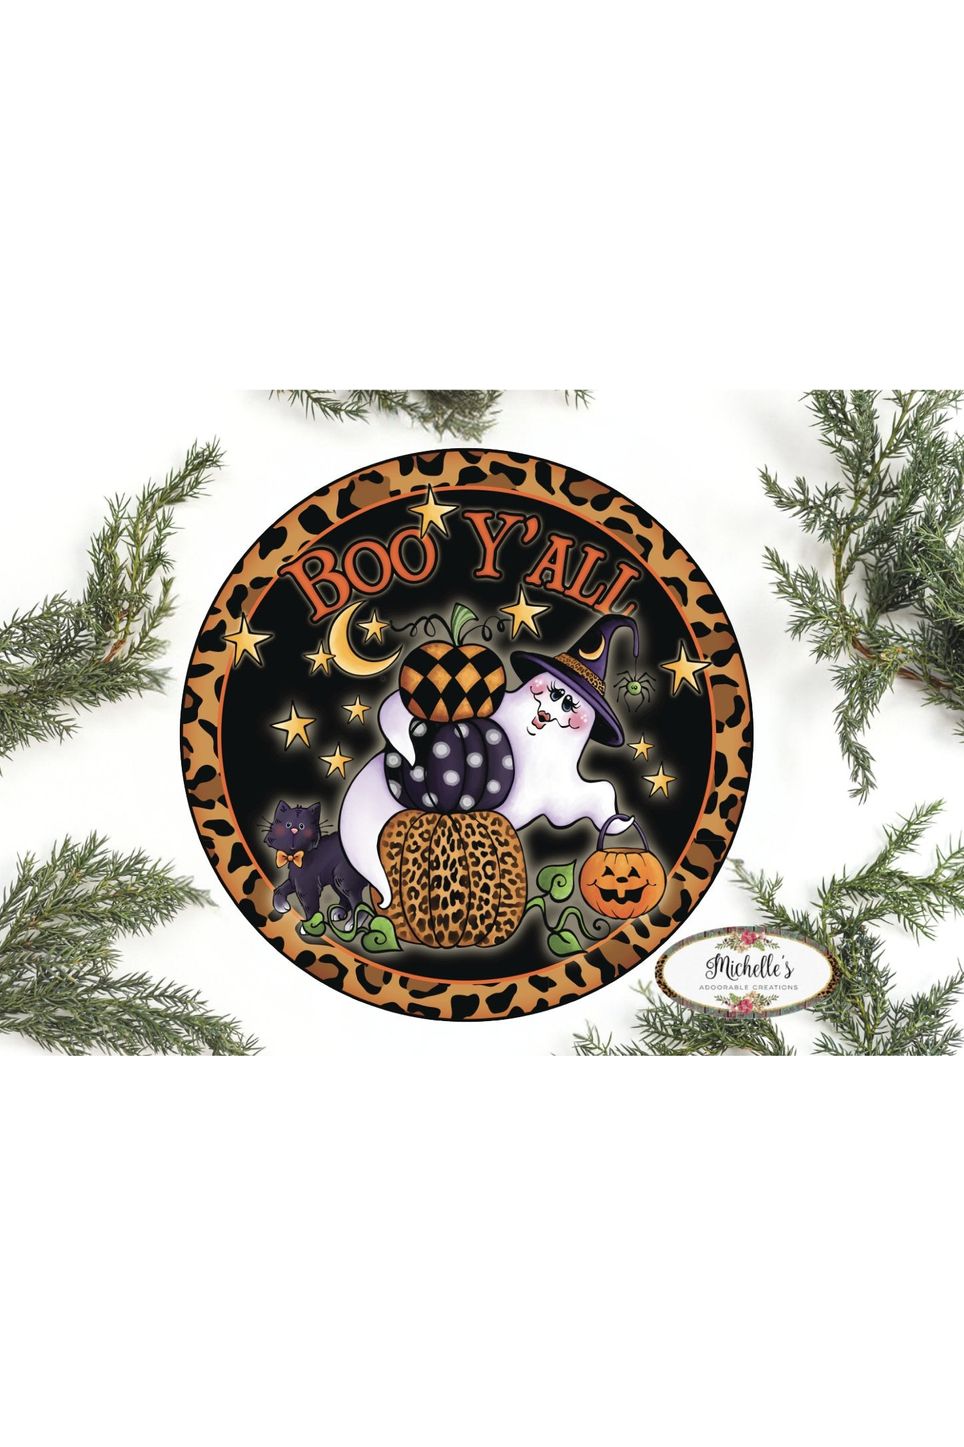 Shop For Leopard Boo Yall Ghost Halloween Sign - Wreath Enhancement